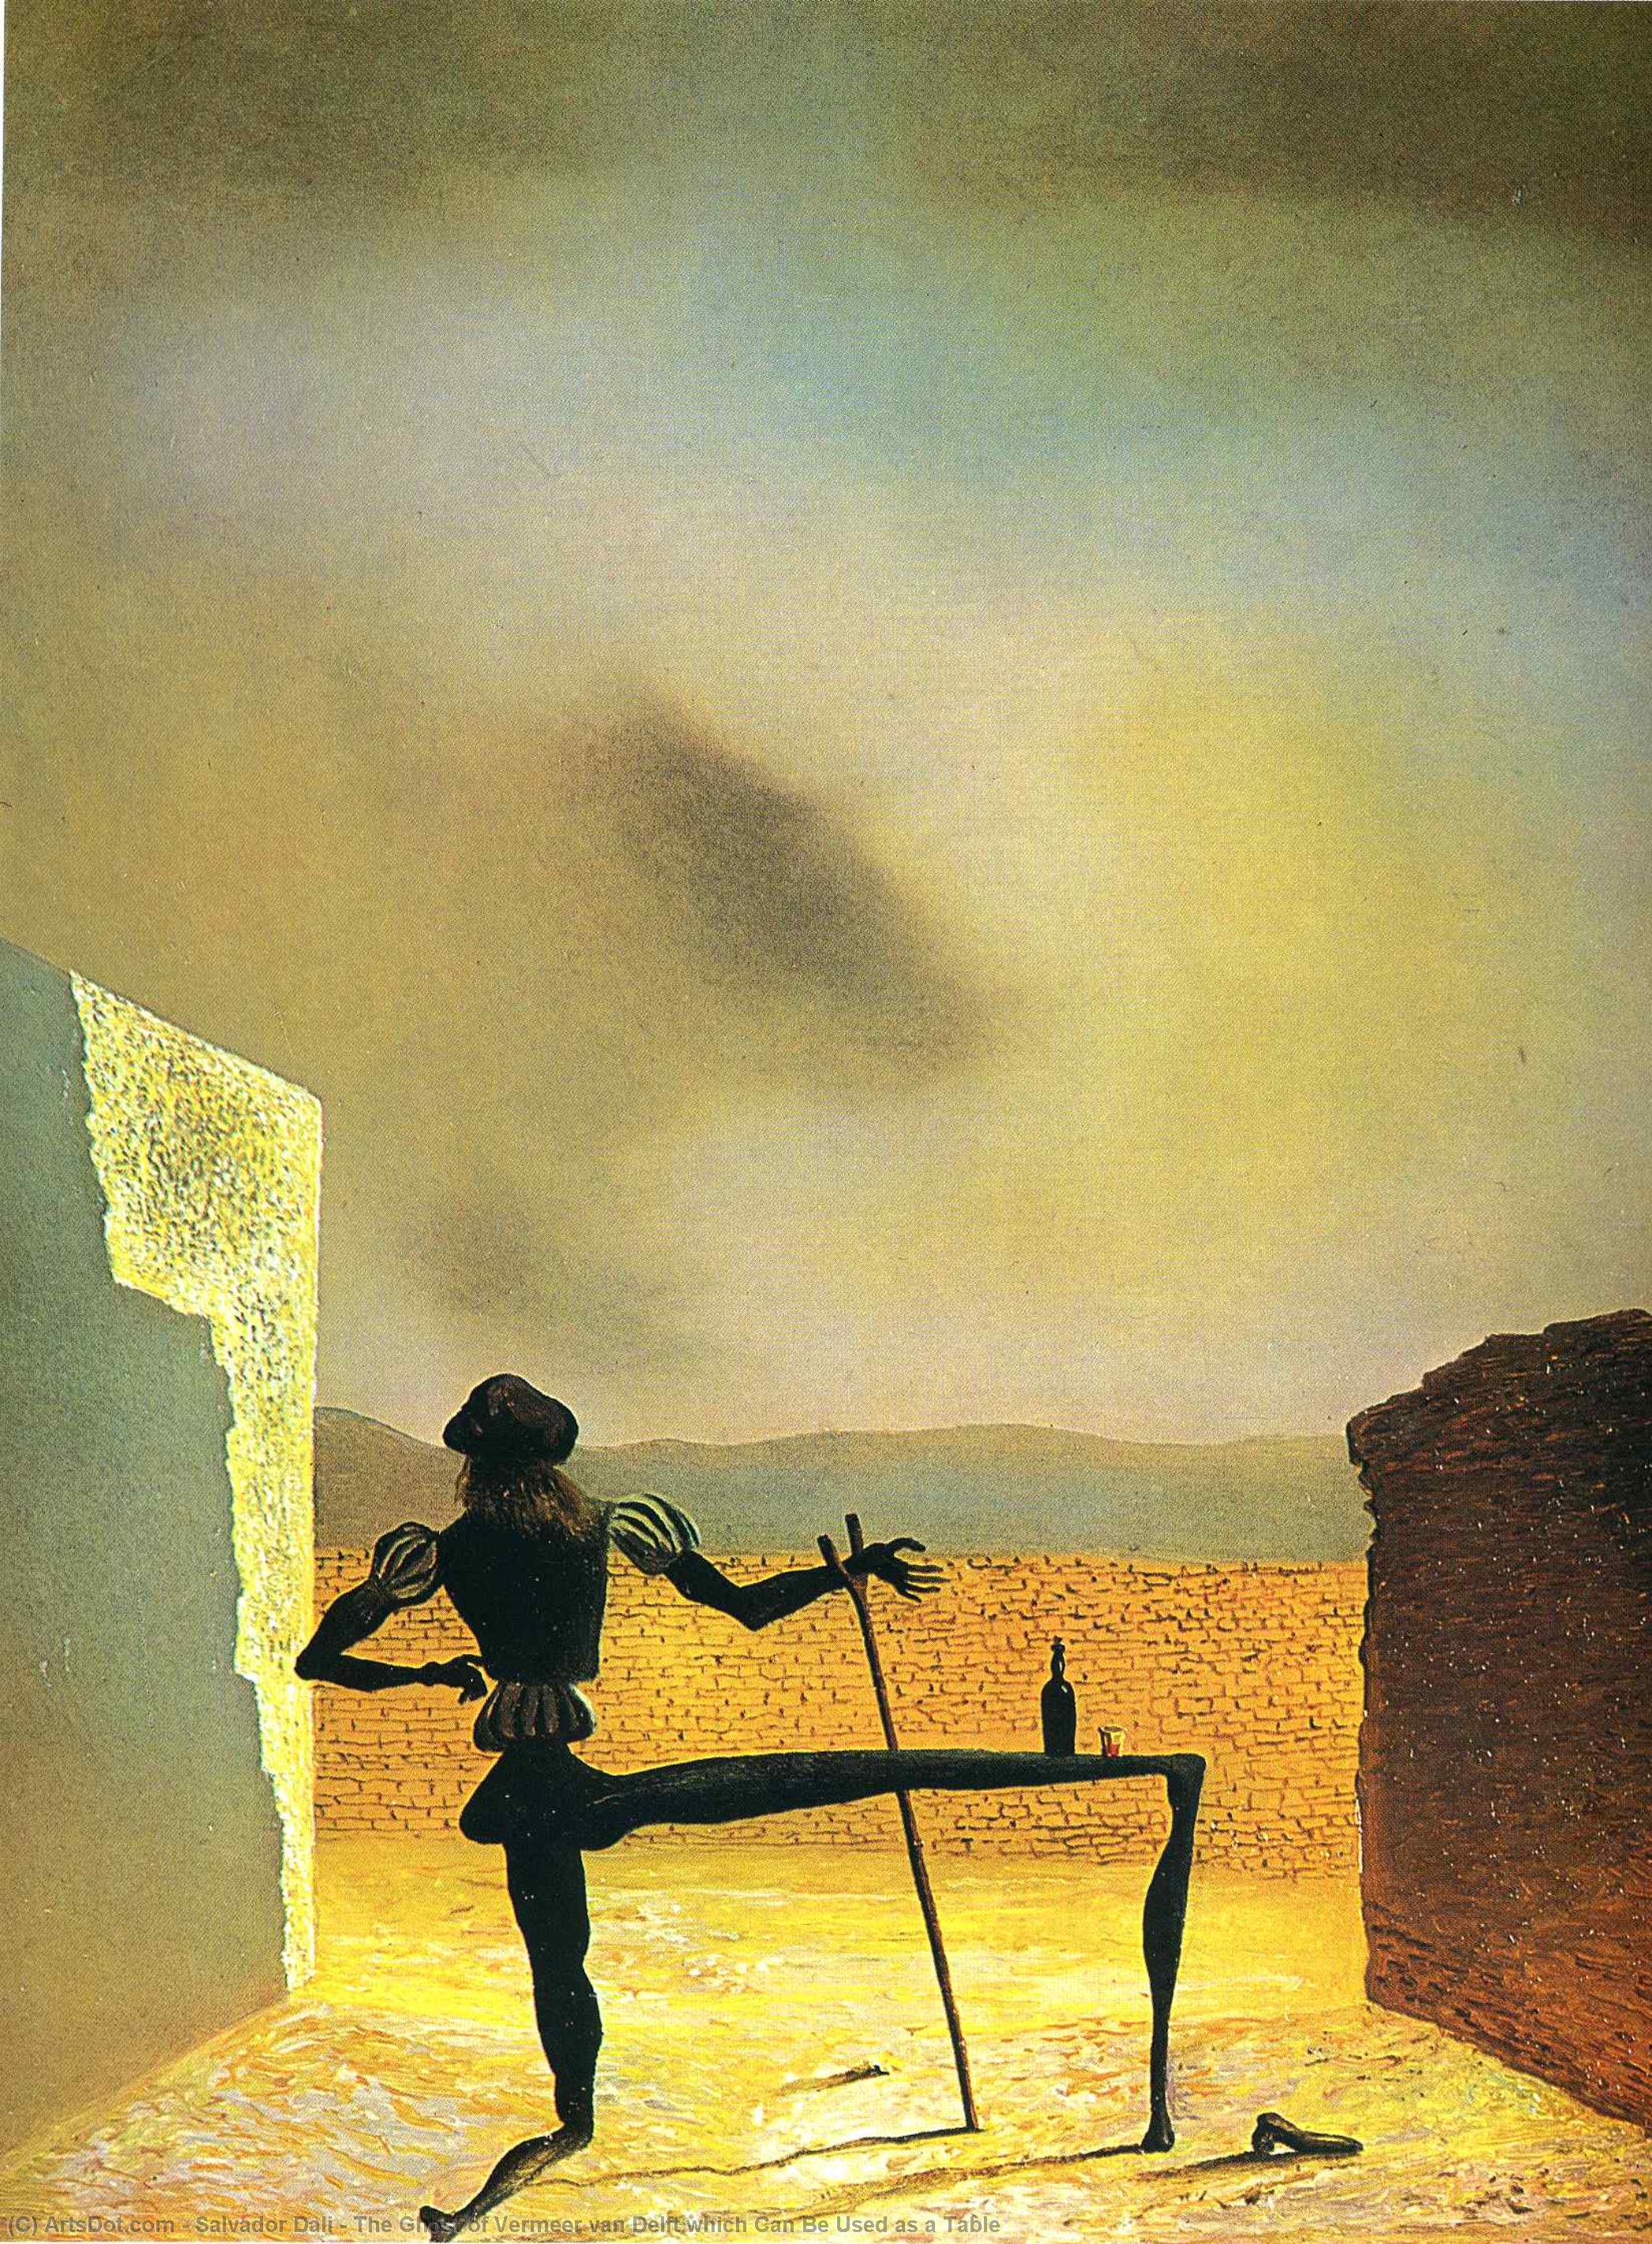 WikiOO.org - Encyclopedia of Fine Arts - Malba, Artwork Salvador Dali - The Ghost of Vermeer van Delft which Can Be Used as a Table